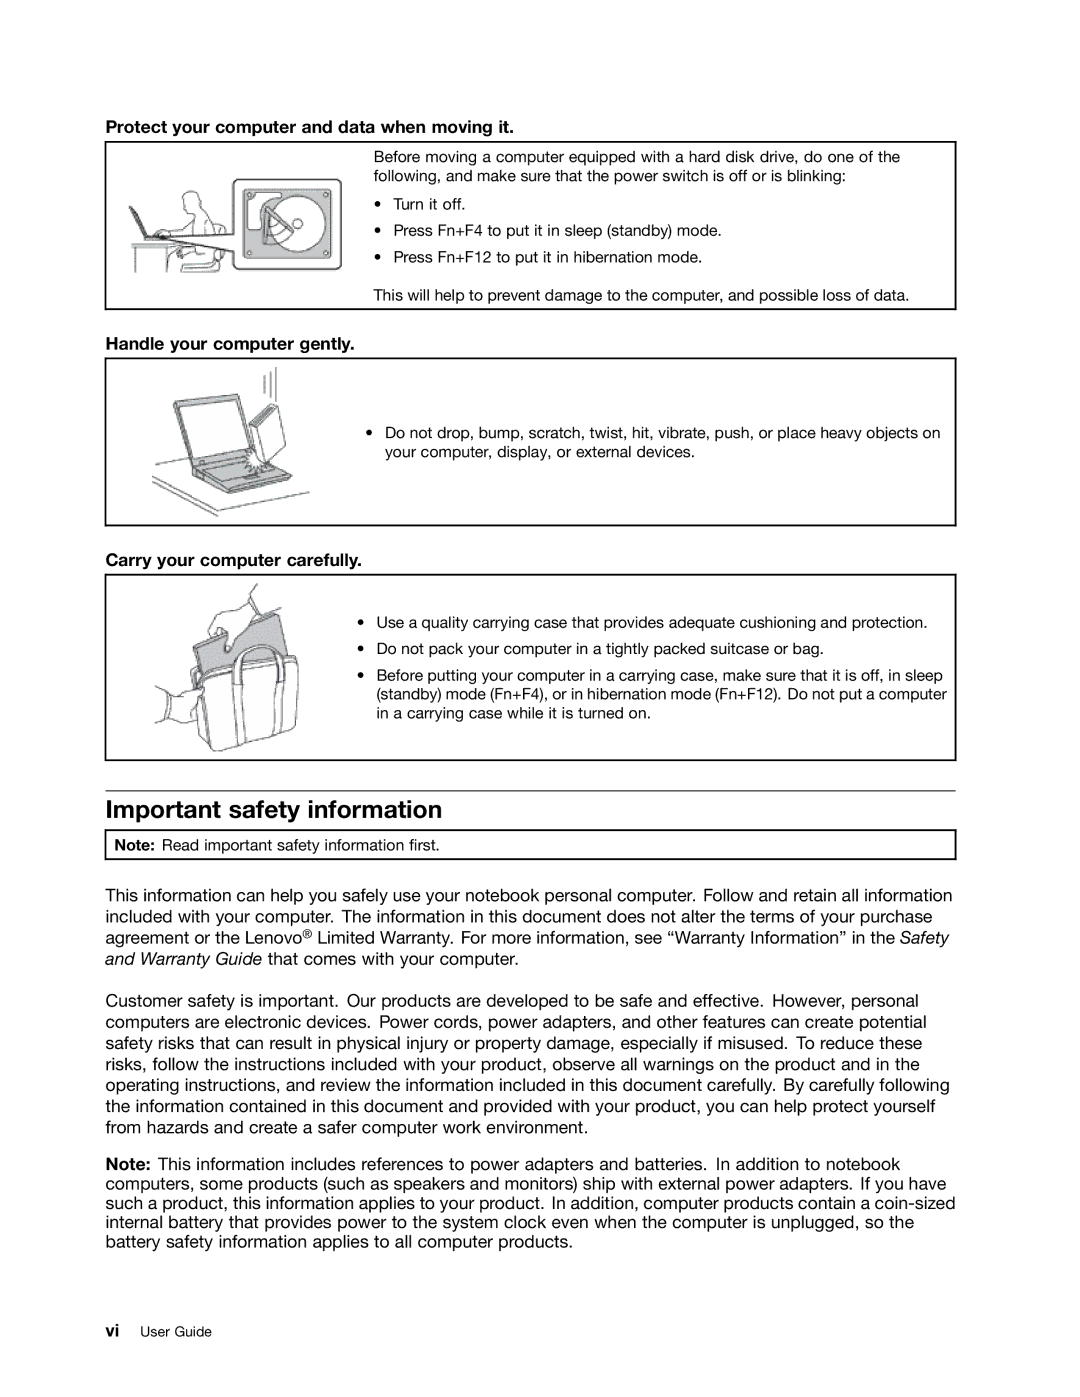 Lenovo 429040 Important safety information, Protect your computer and data when moving it, Handle your computer gently 